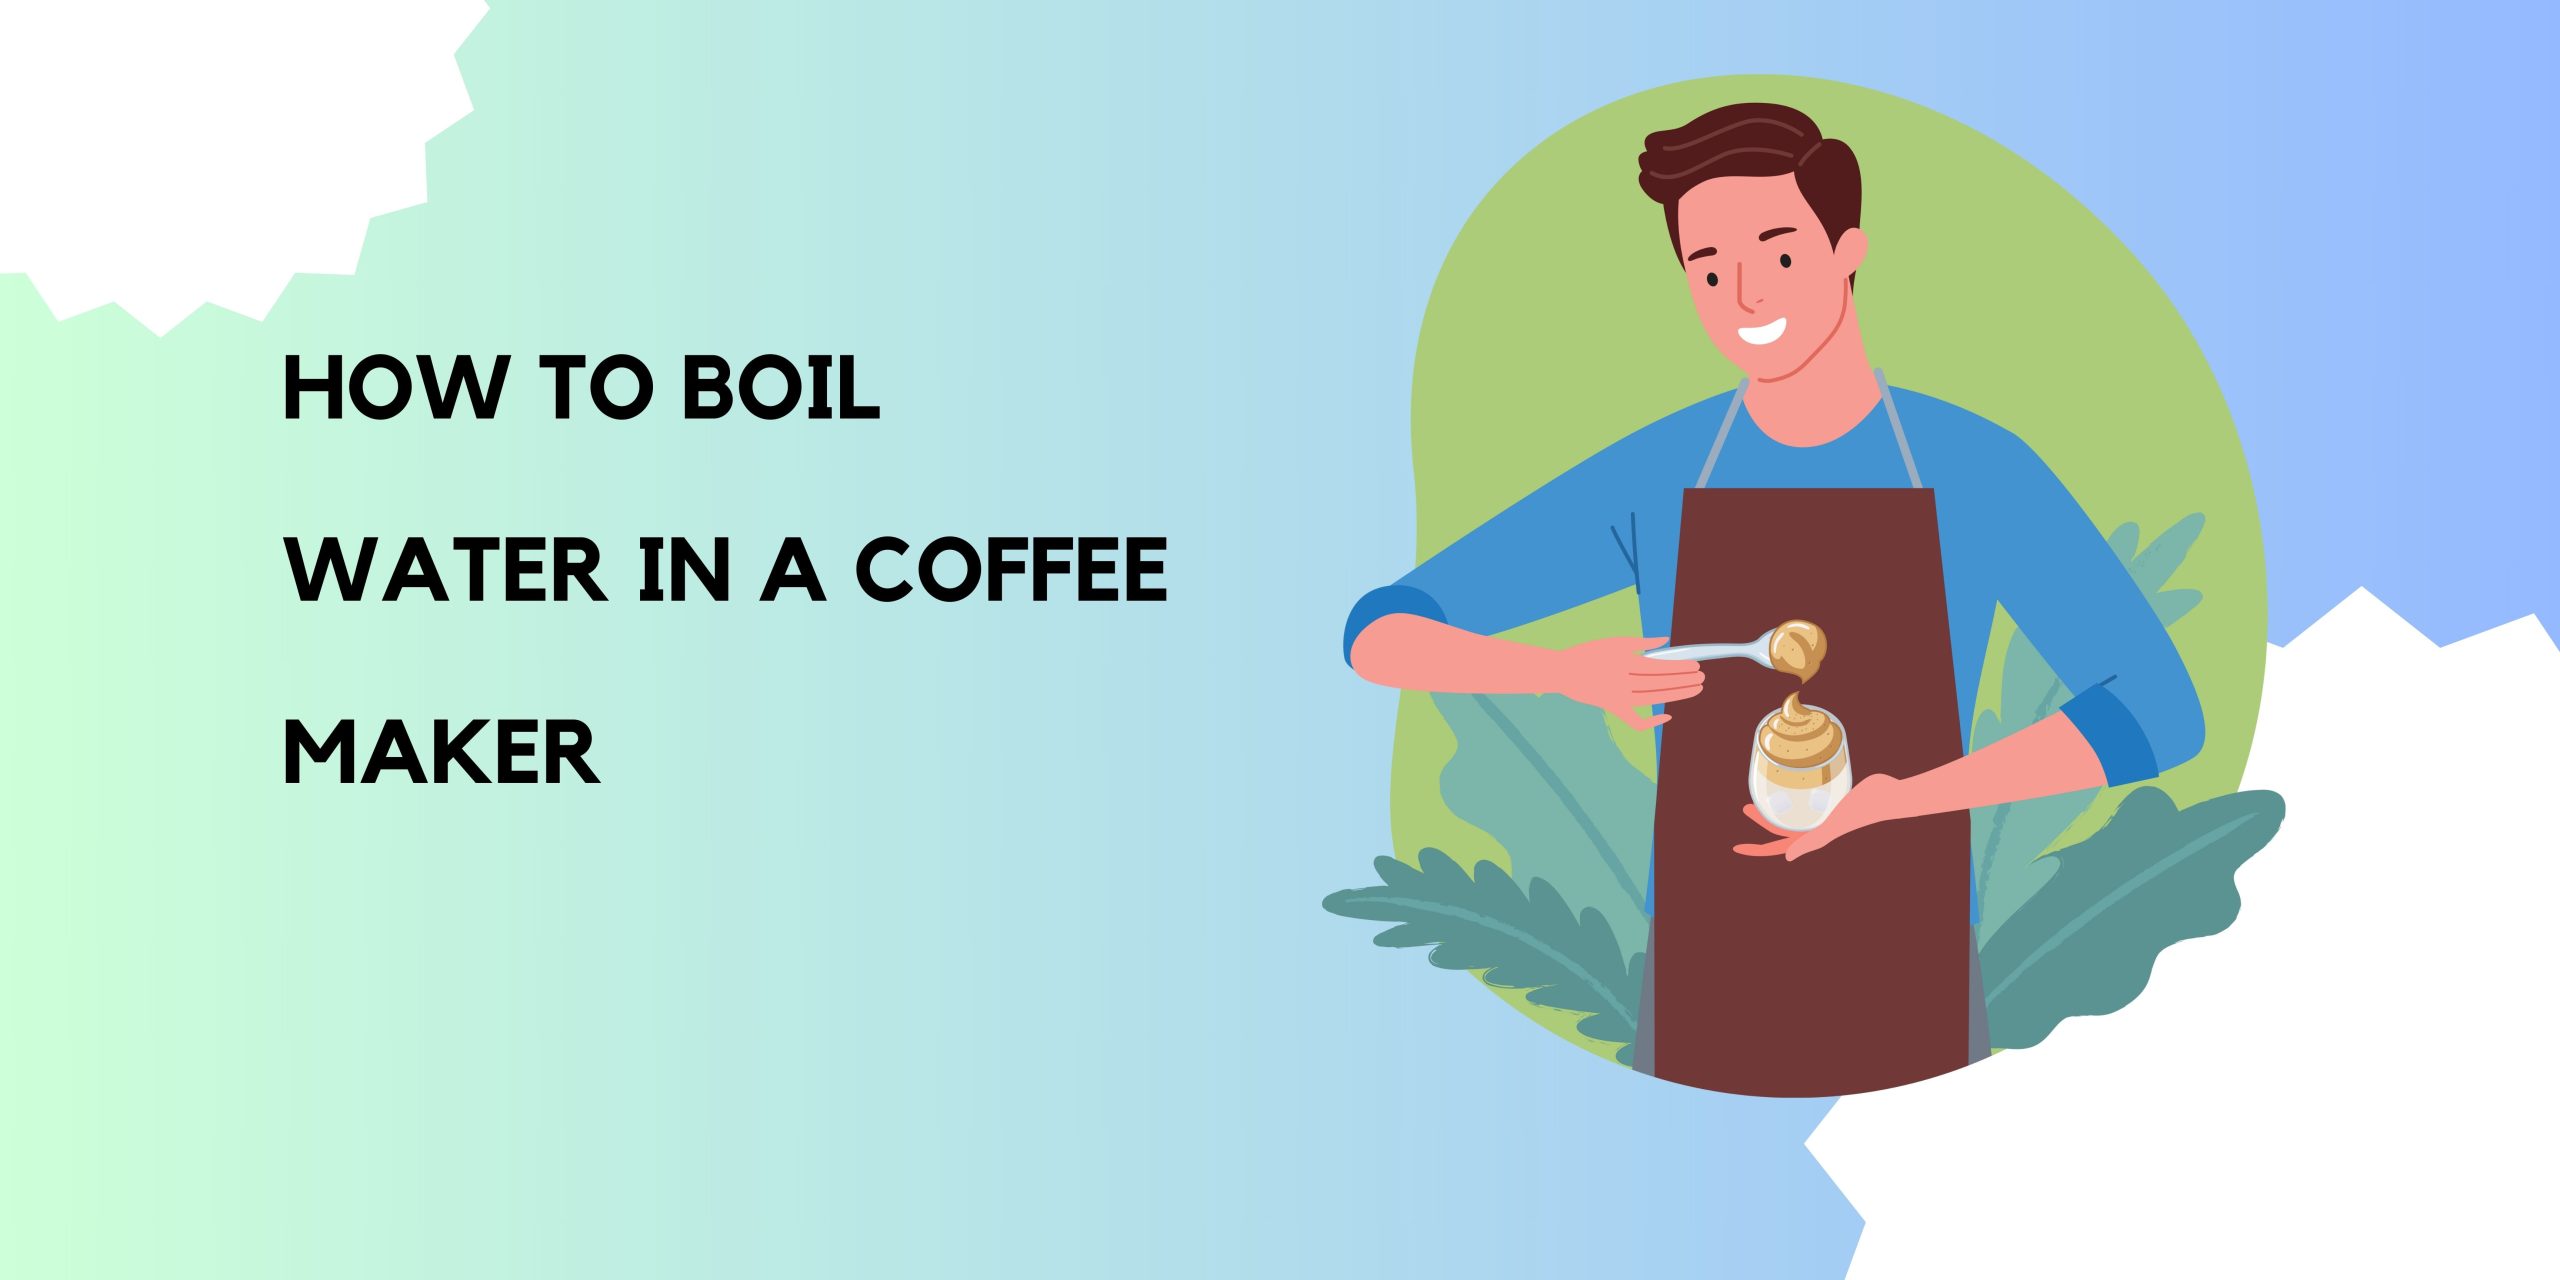 How to boil water in a coffee maker